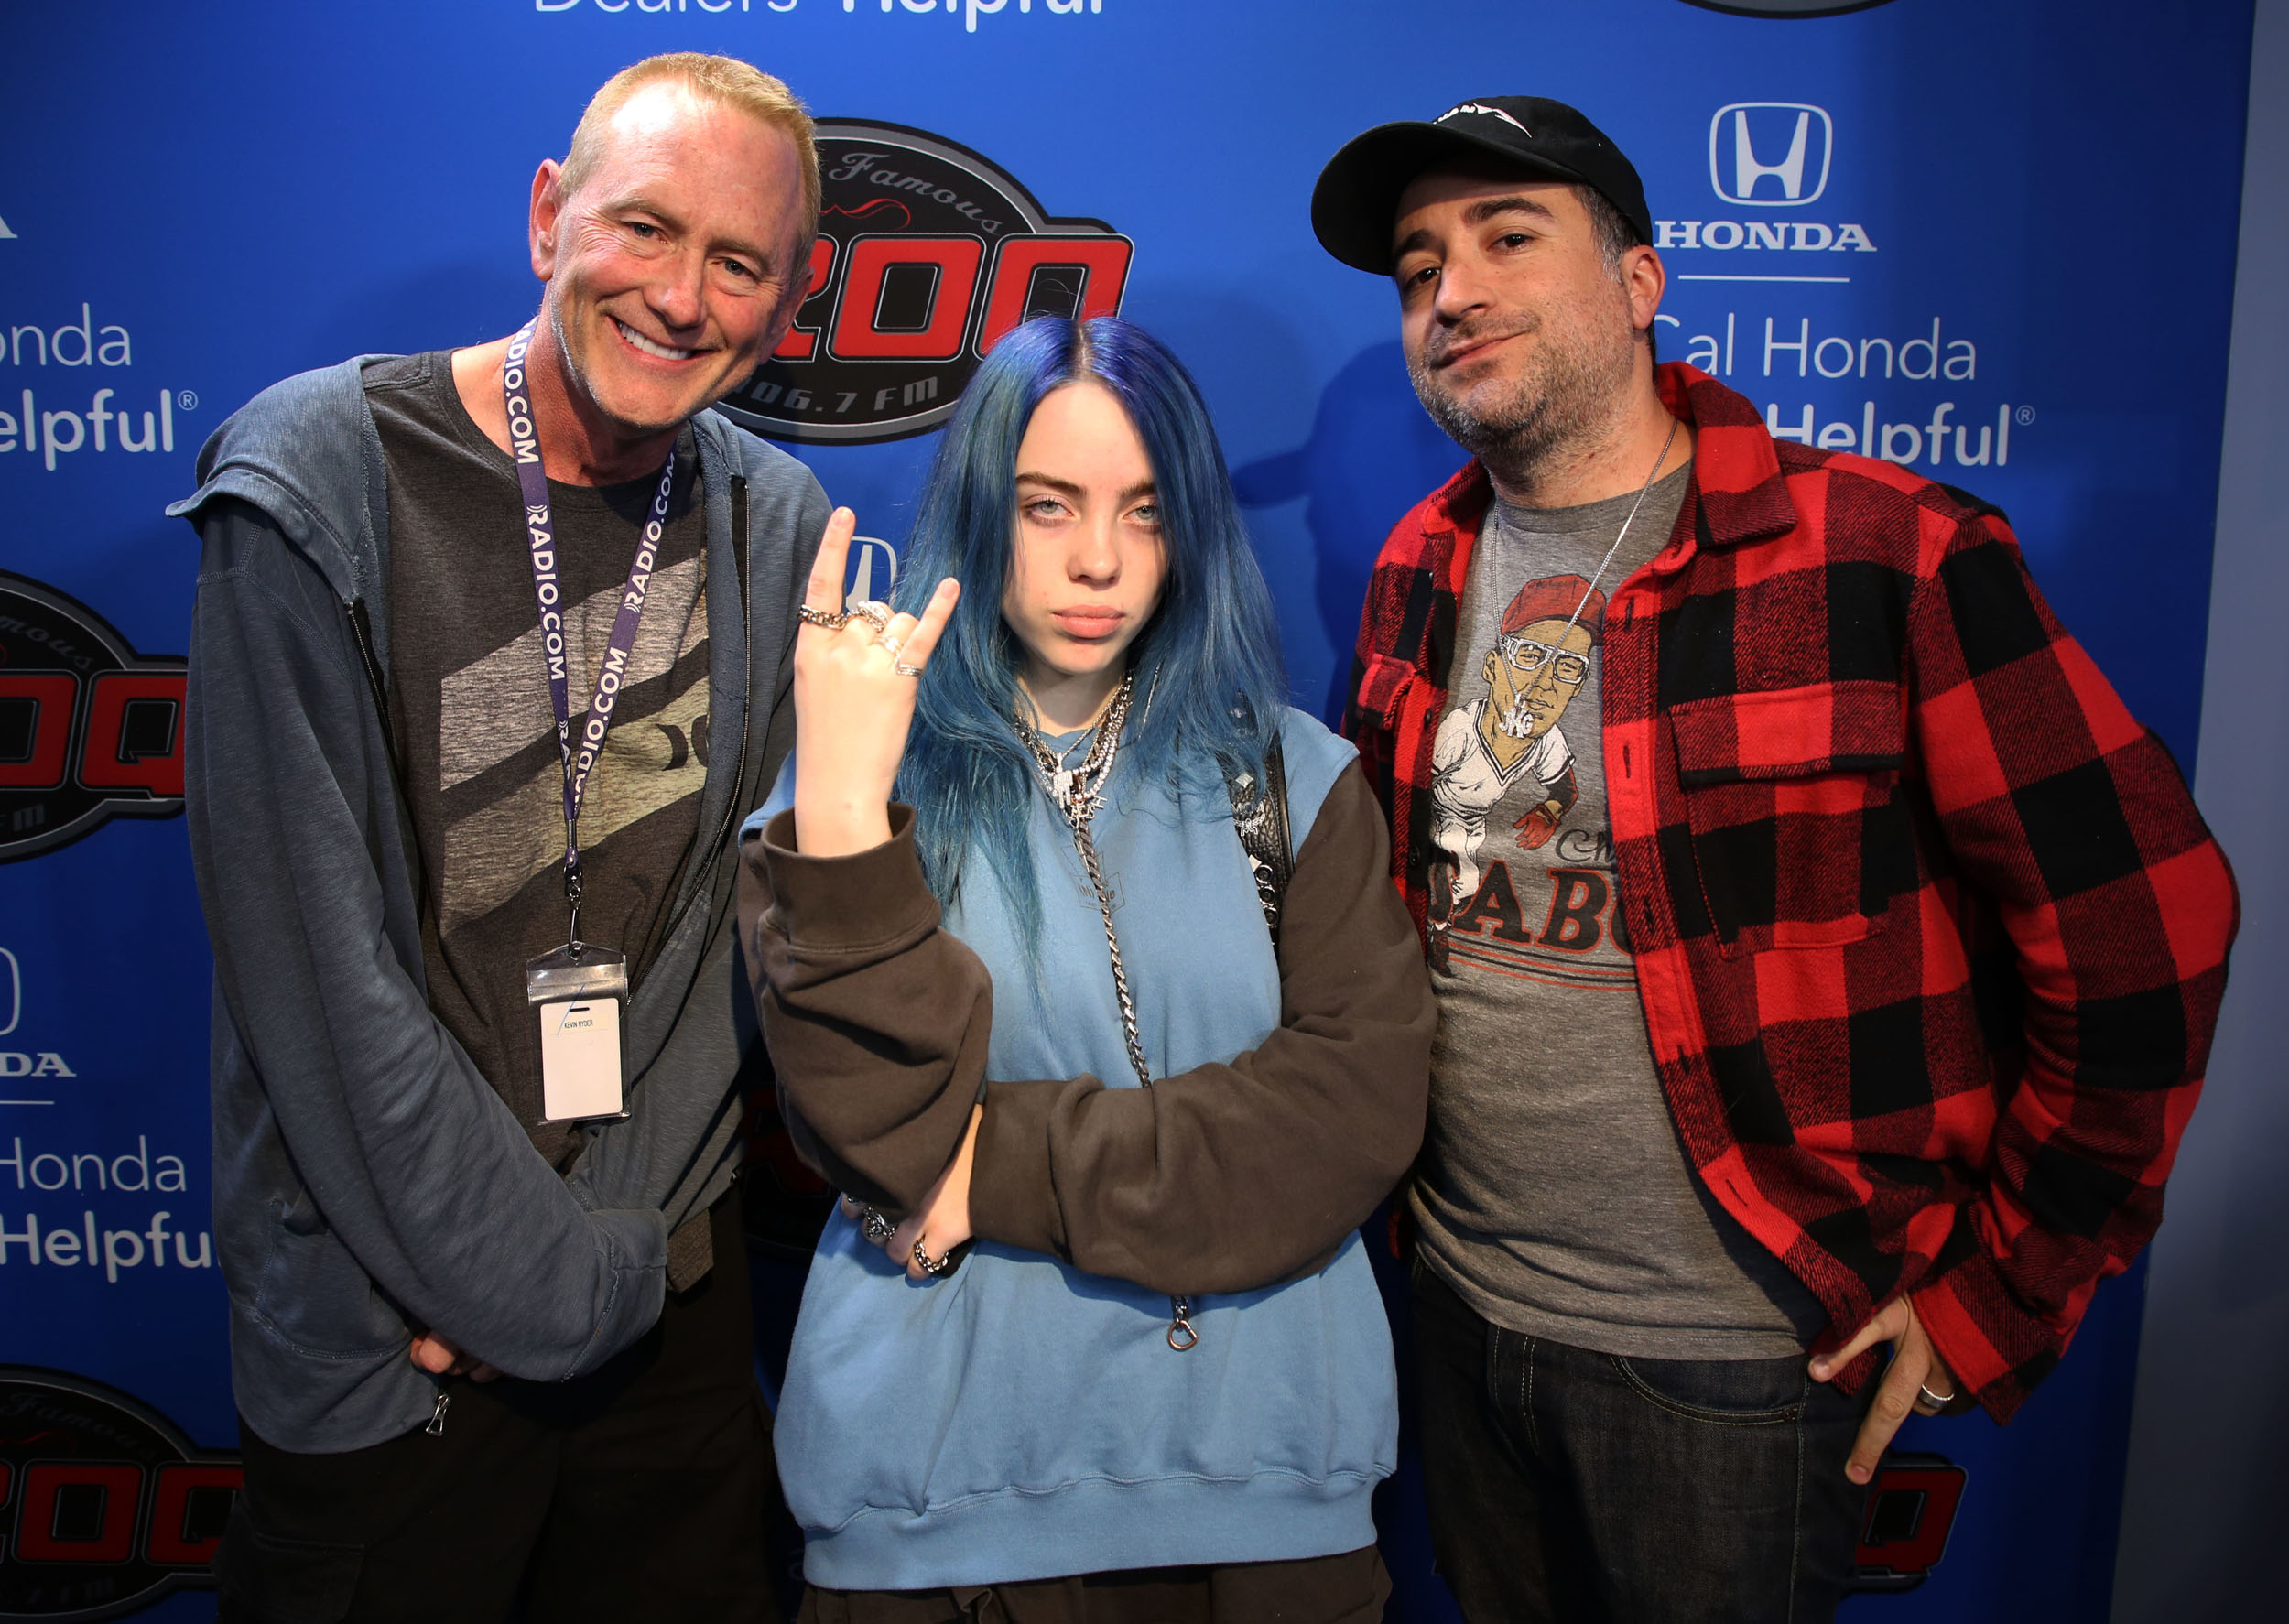 Tuesday, November 20th with guests: Greg Fitzsimmons and Billie Eilish